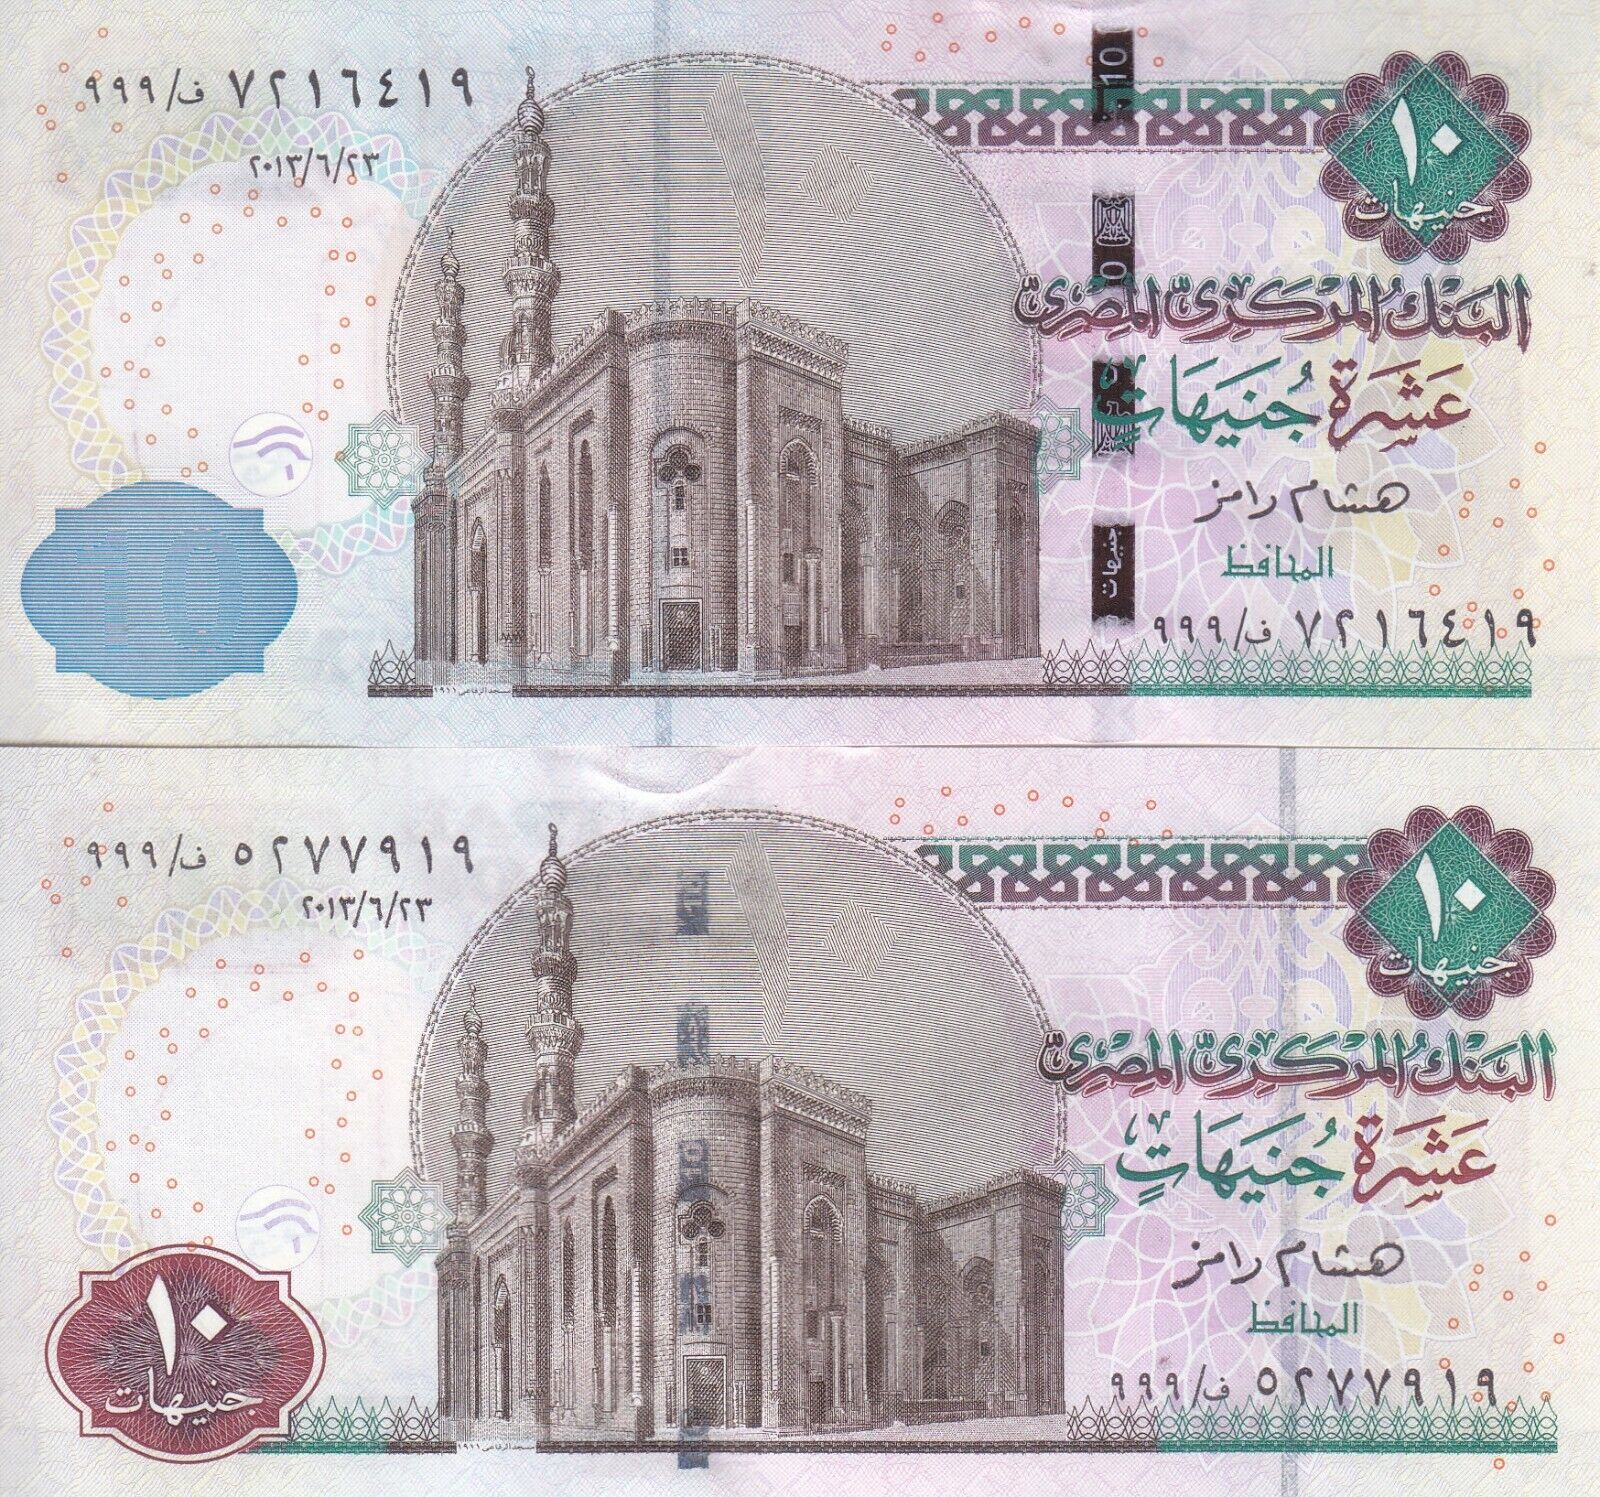 EGYPT 10 EGP POUNDS 2013 P-64d Clearance SALE! Limited time! 71a SIG Weekly update UNC 999 SERIAS #23 RAMEZ